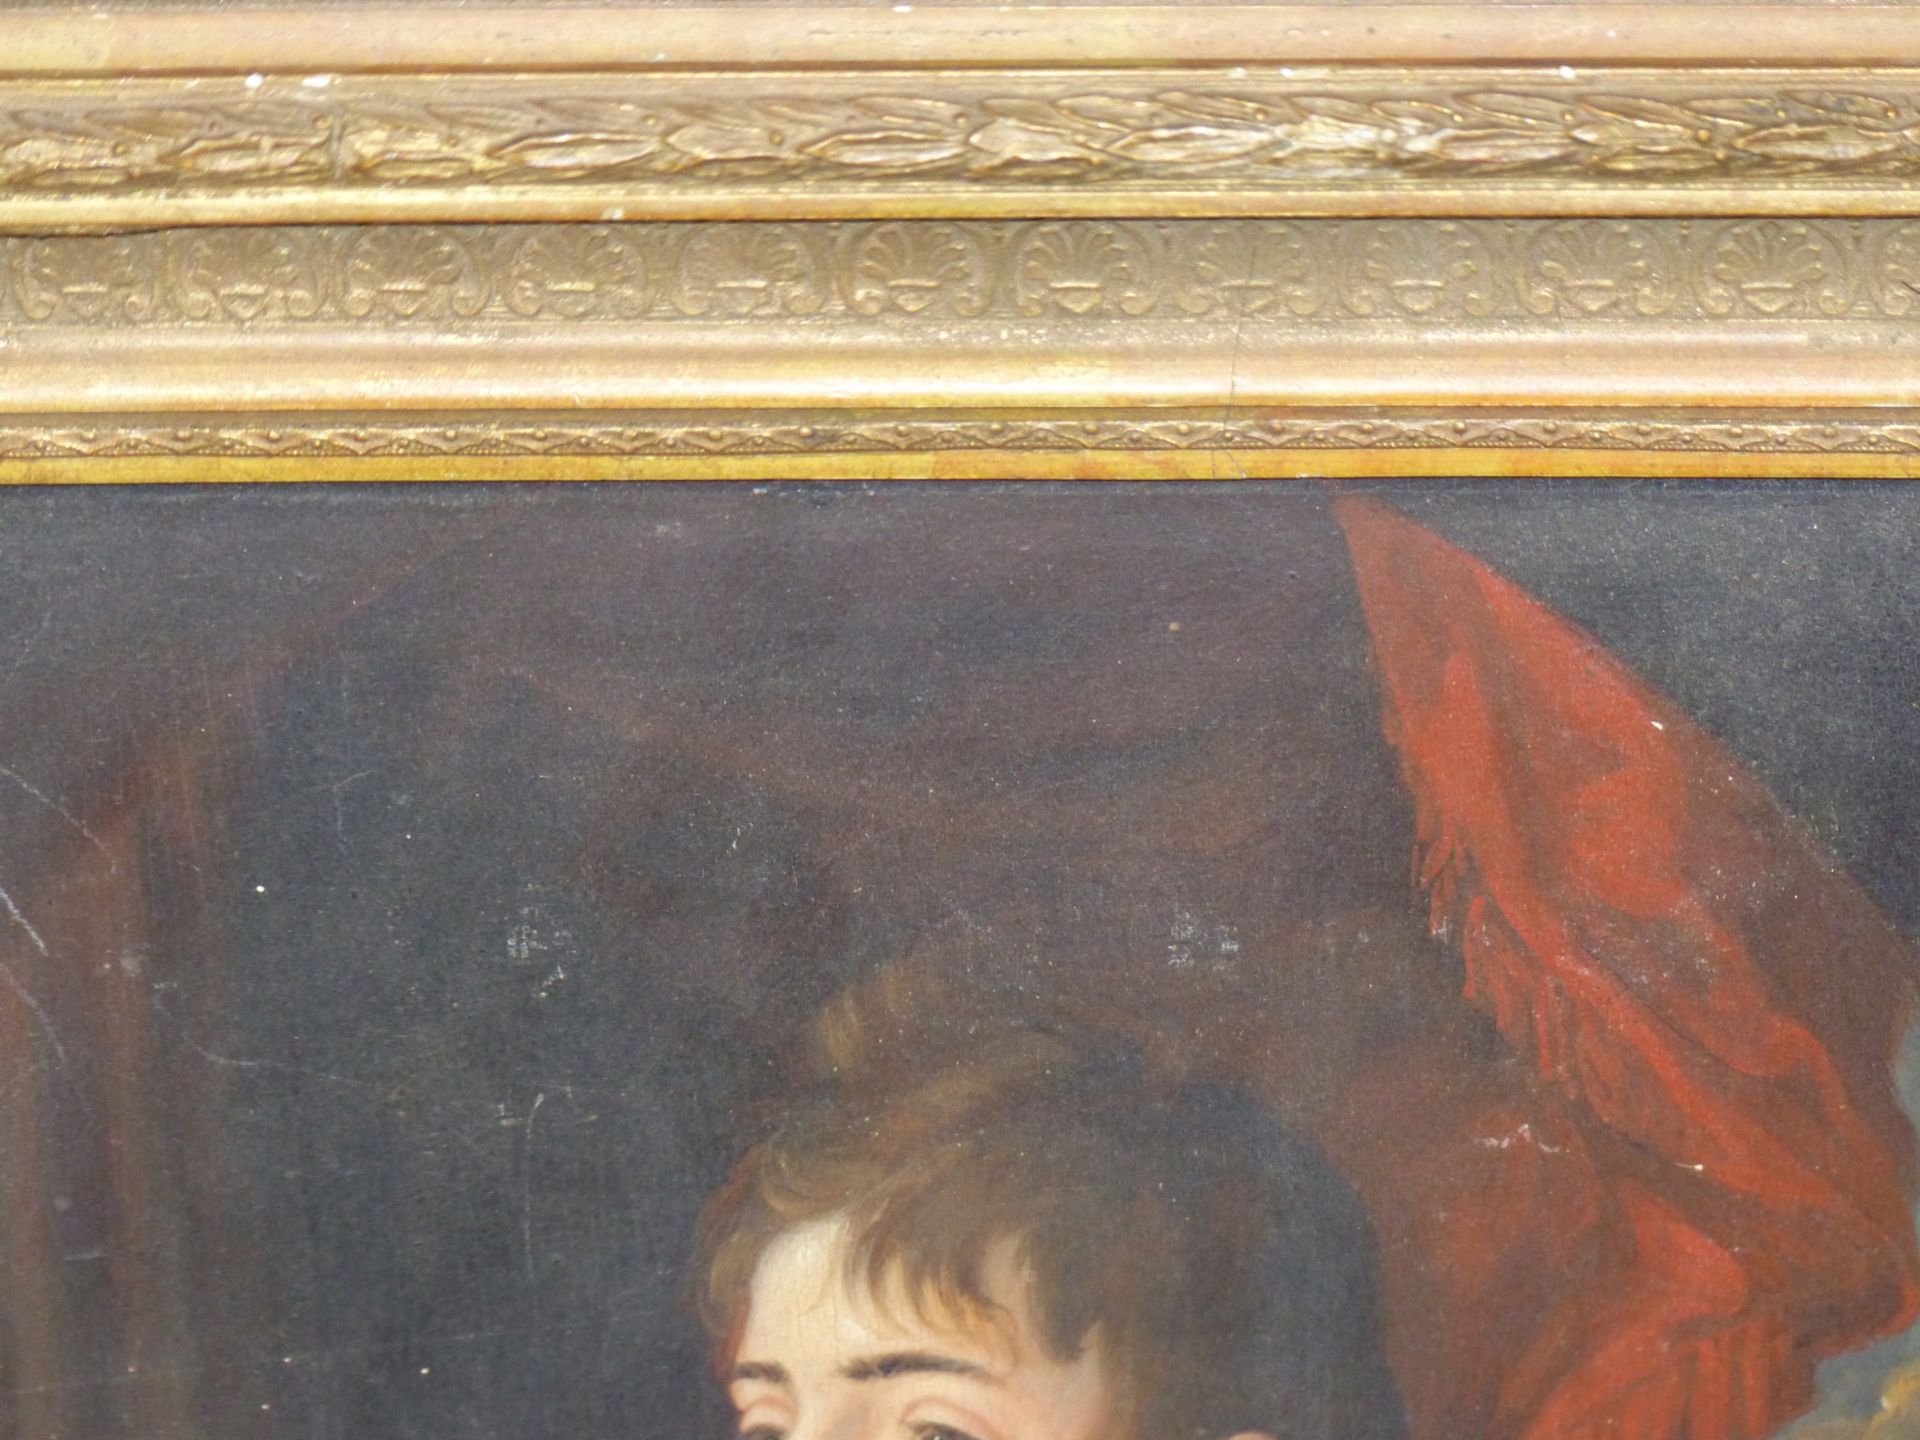 EARLY 19TH CENTURY ENGLISH SCHOOL, PORTRAIT OF A YOUNG GENTLEMAN, OIL ON PANEL. 21 X 28 cm. - Image 9 of 11